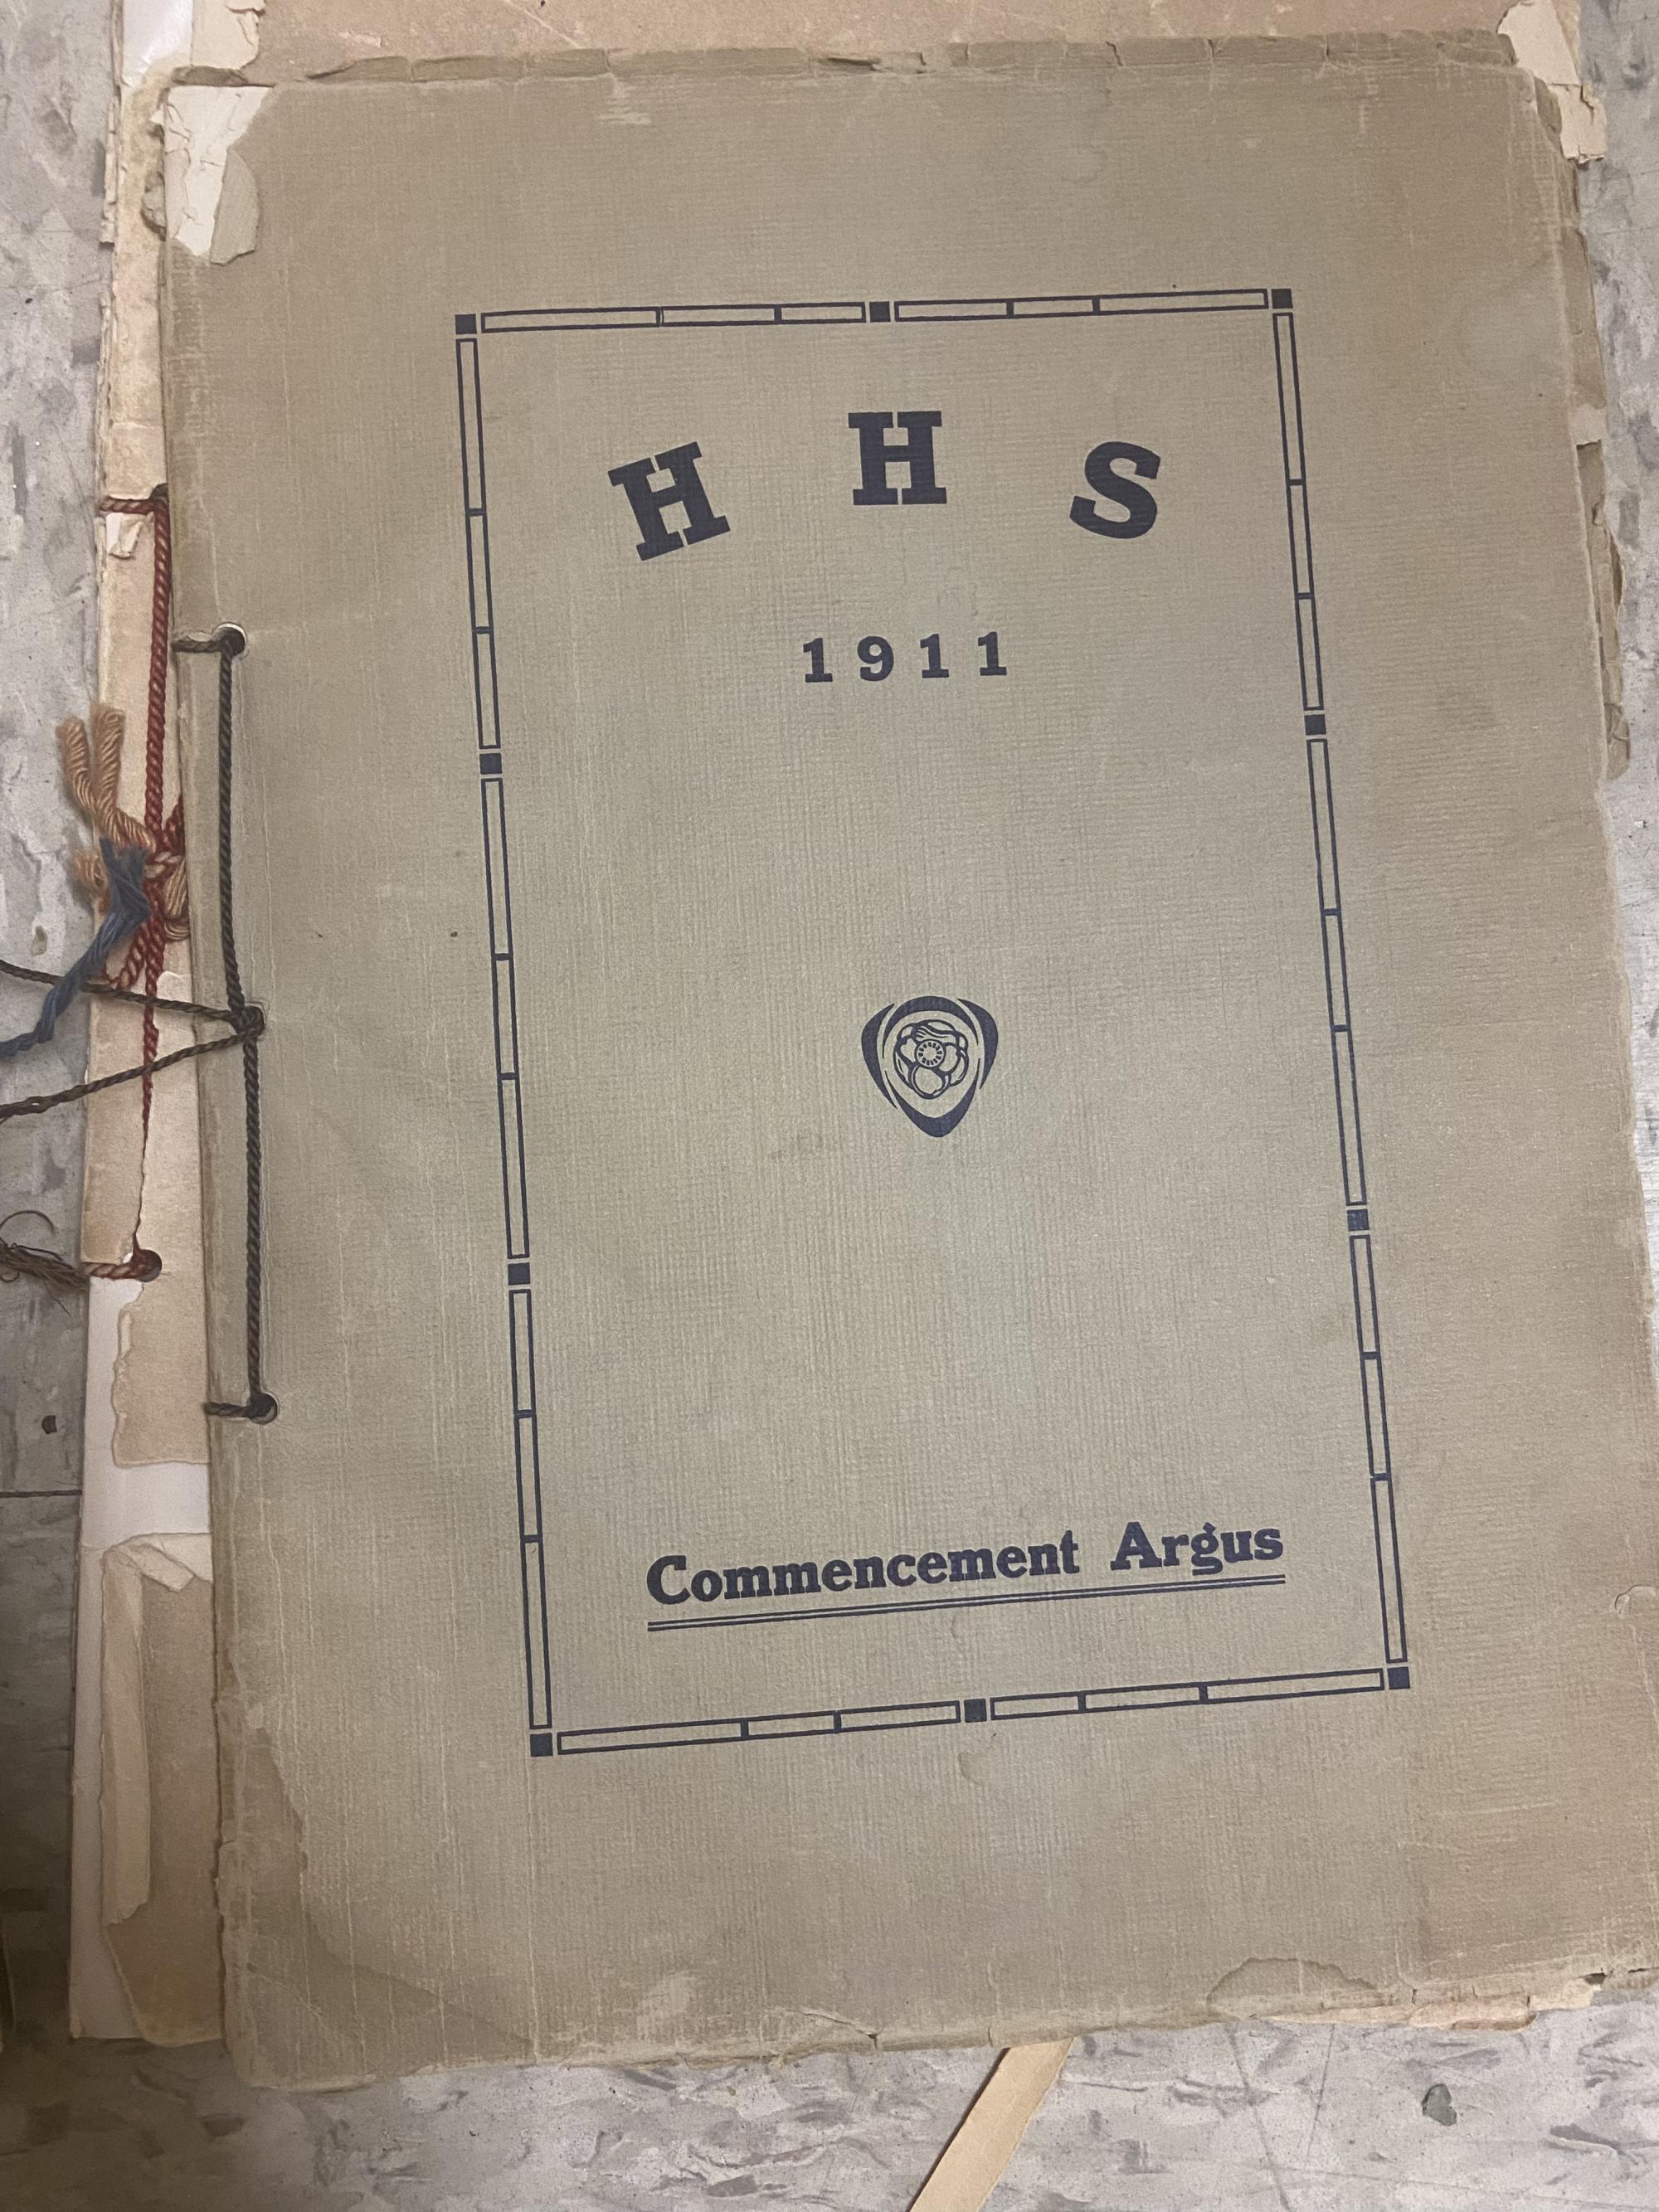 This is a picture of the front cover of Harrisburg High School's 1911 yearbook.